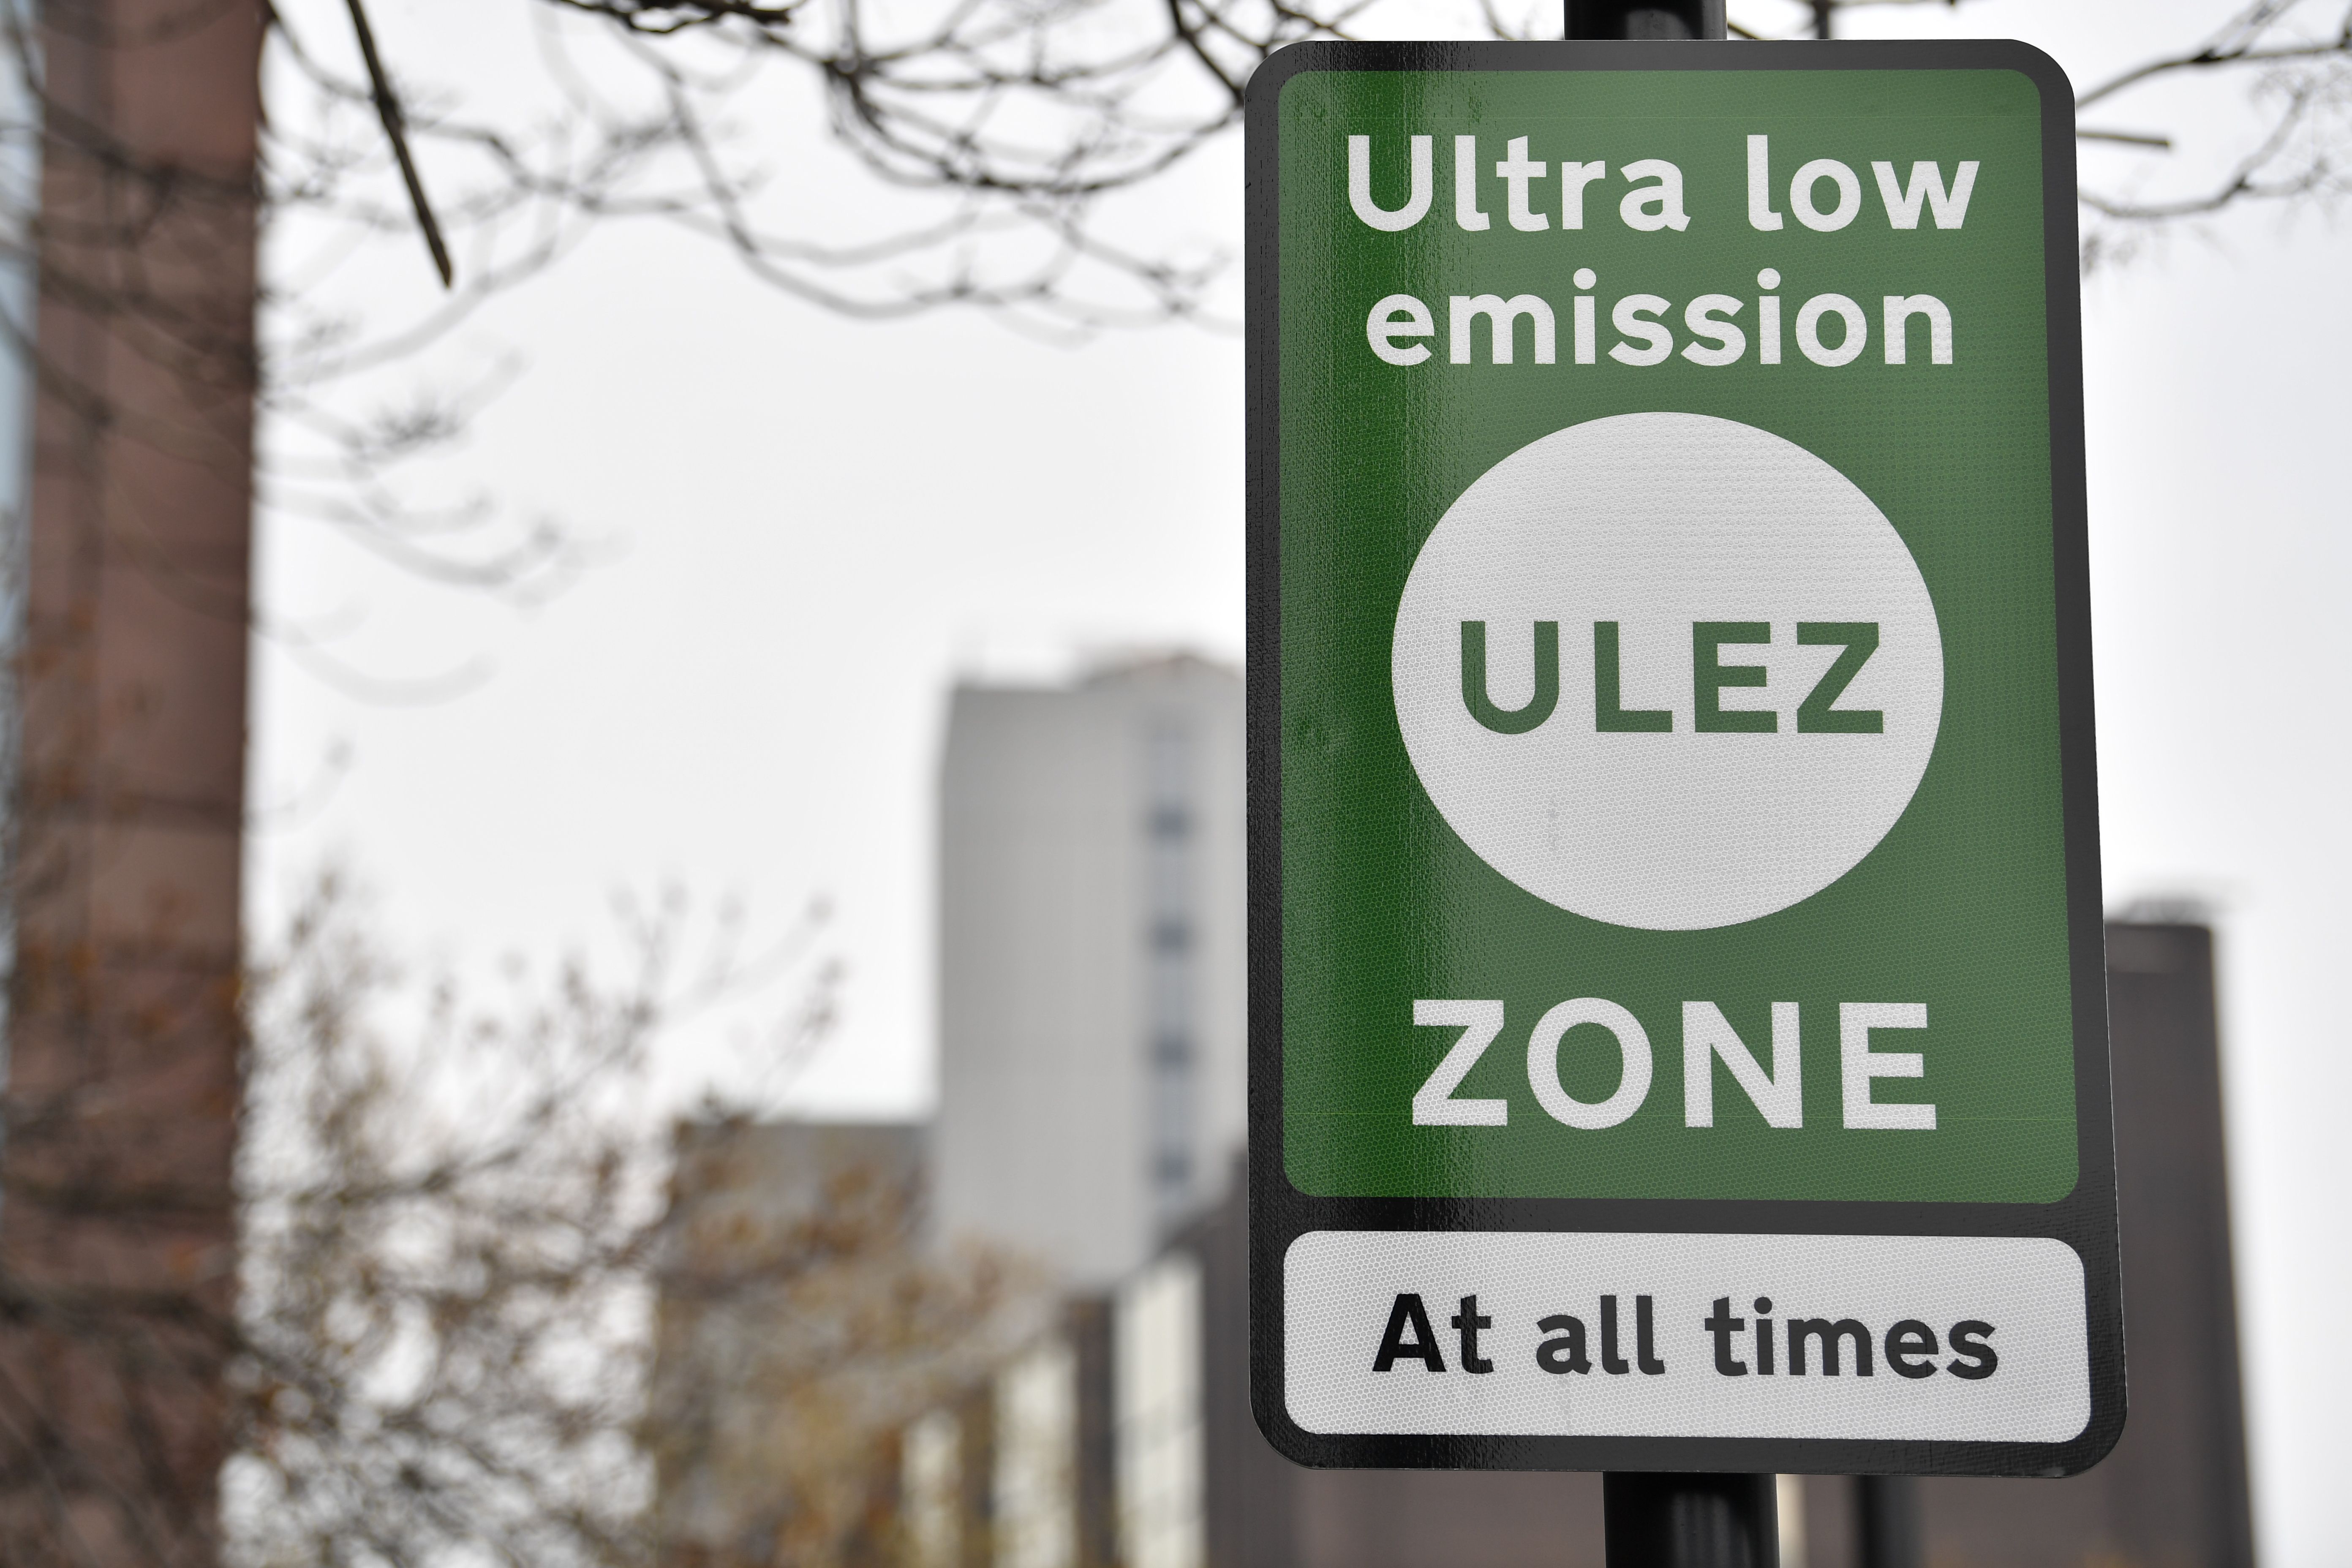 New signs for the ultra-low emission zone (Ulez) are pictured in central London on April 8, 2019. (BEN STANSALL/AFP/Getty Images)